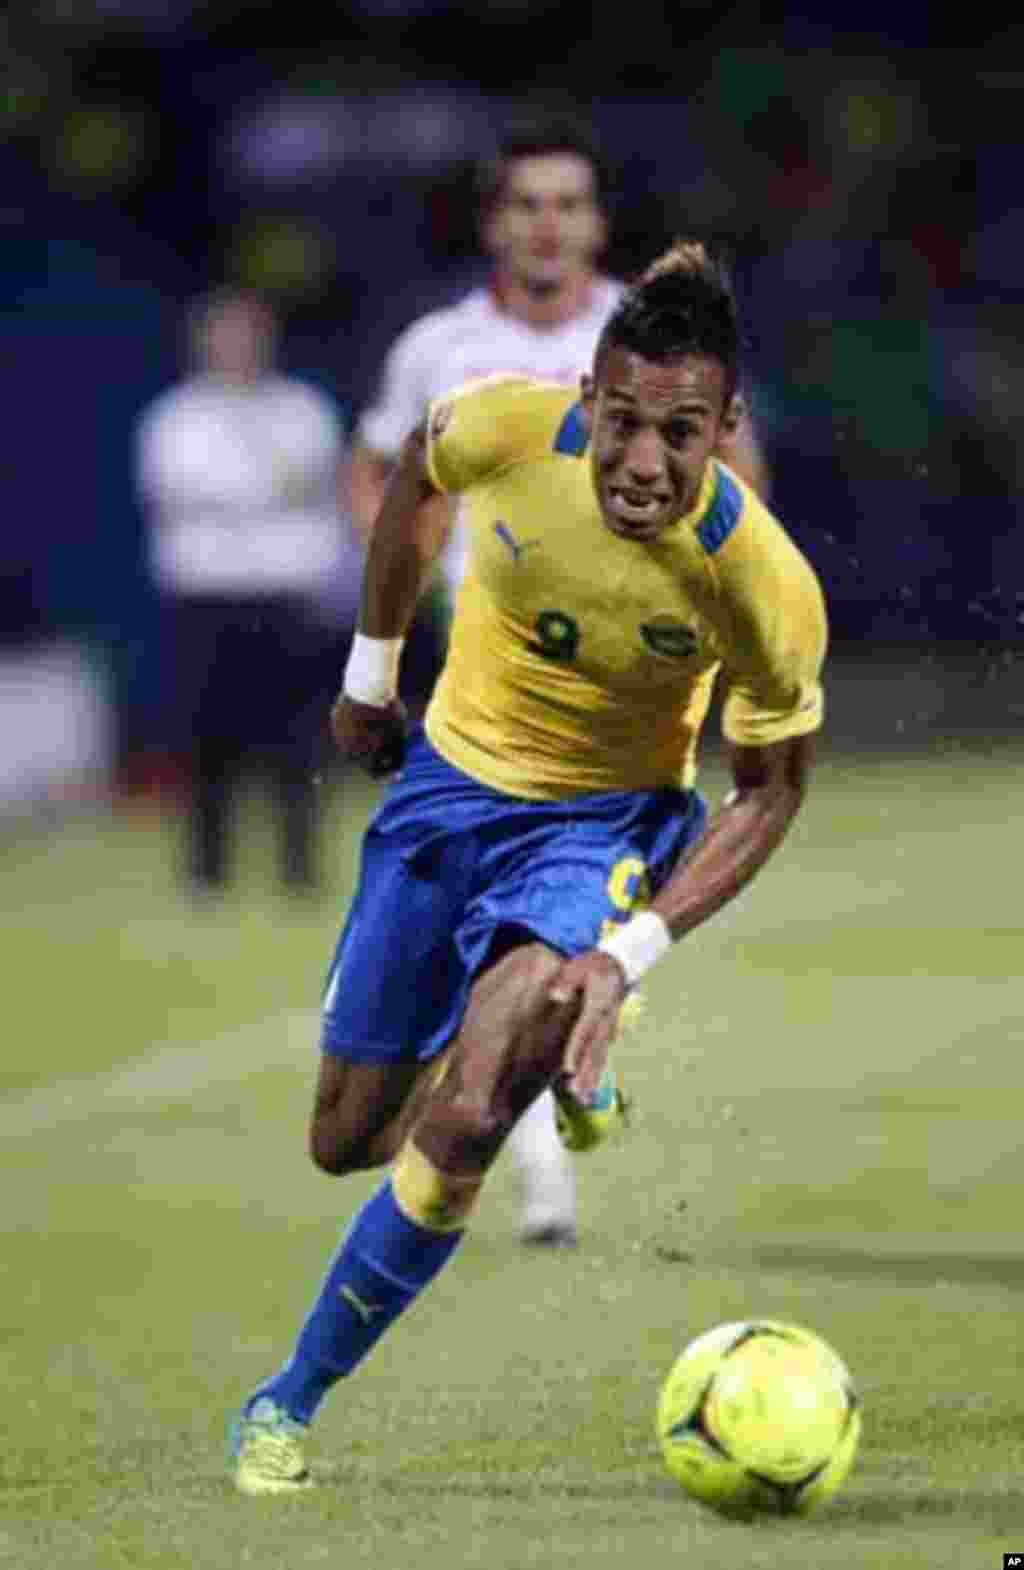 Gabon's Pierre Emerick Aubameyang runs with the ball during their African Cup of Nations Group C soccer match against Tunisia at Franceville stadium in Gabon January 31, 2012.